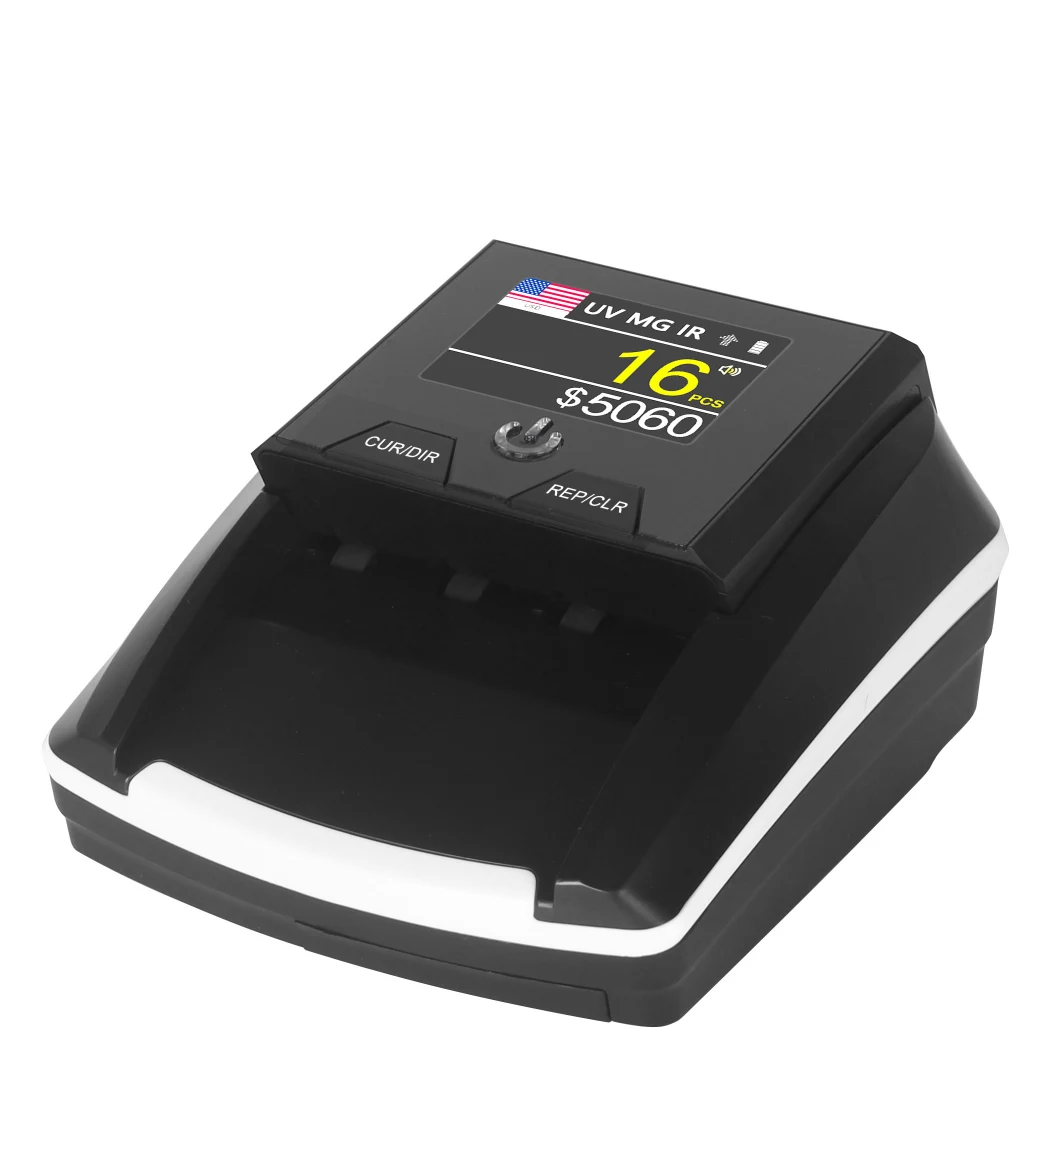 Al-136t Dollar Euro Currency Smart Money Detector Total Amount Available with Battery